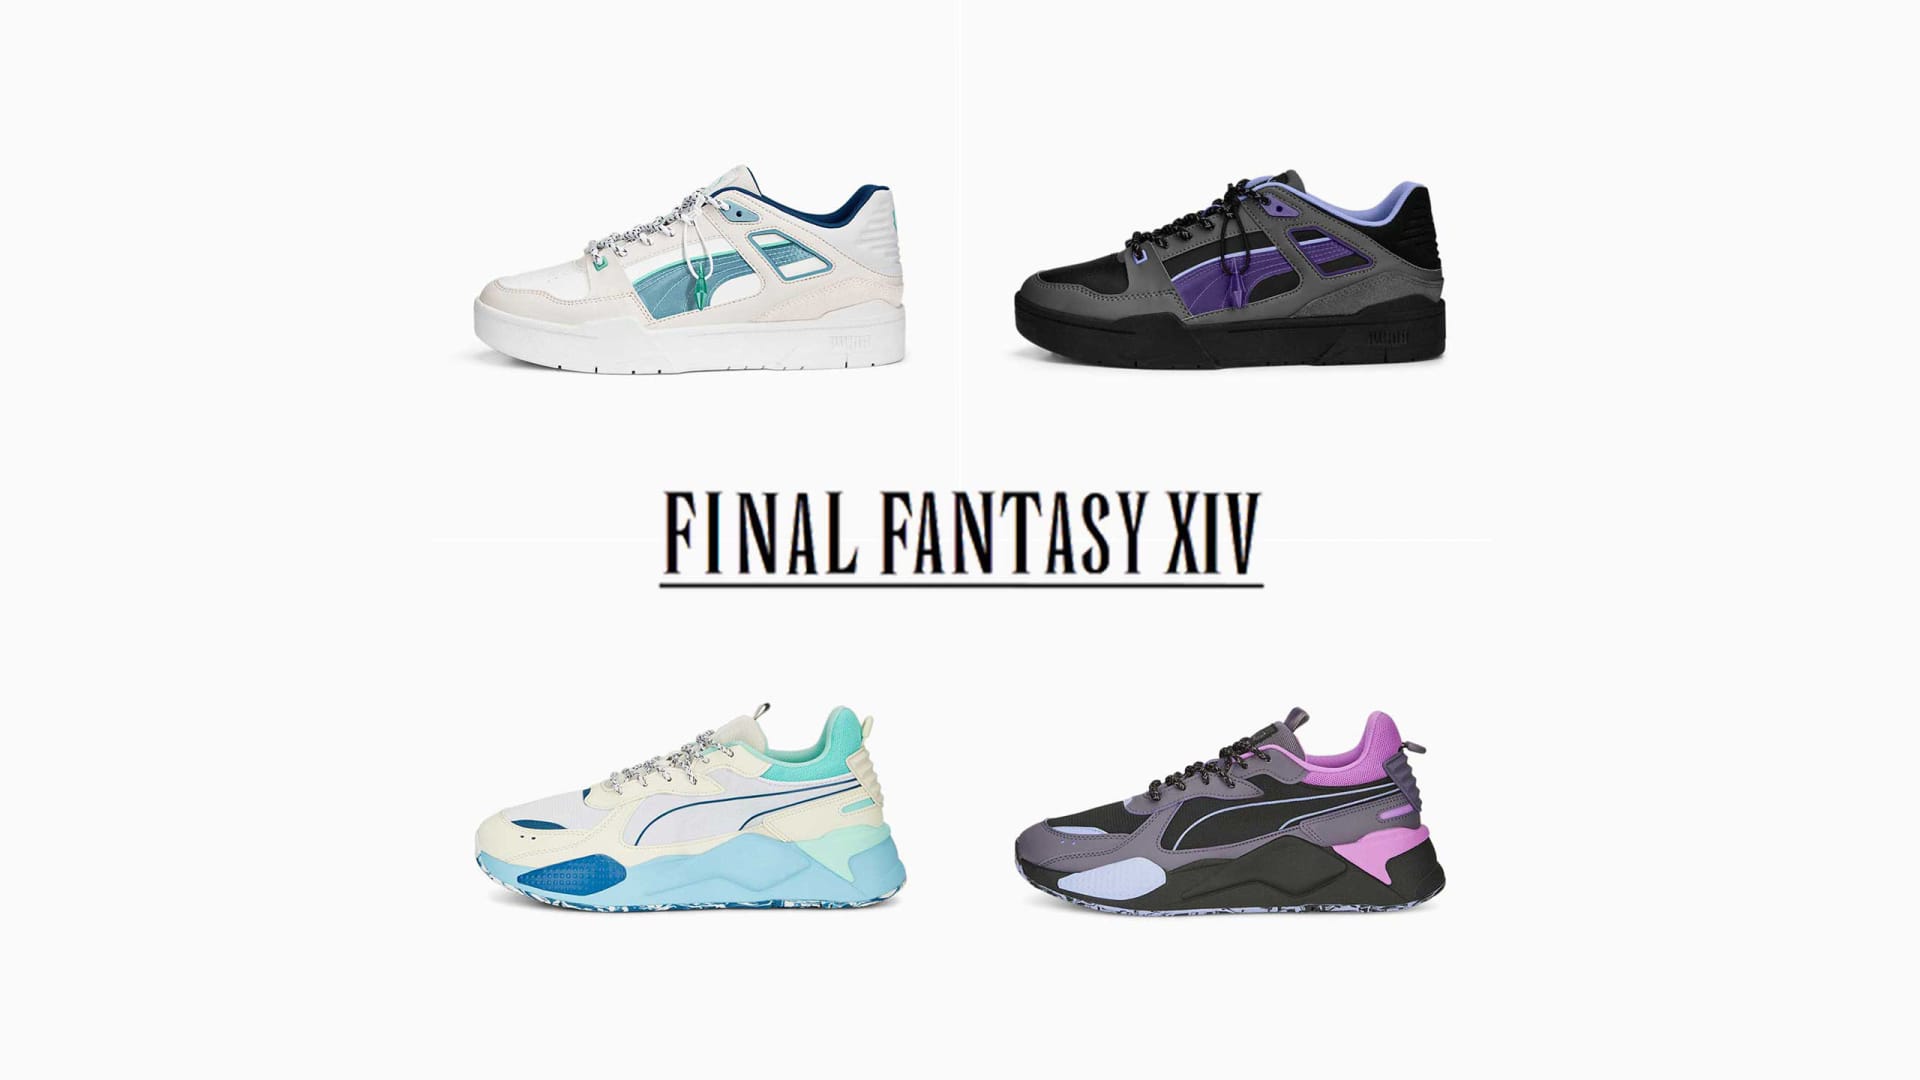 Final Fantasy XIV Sneaker Collaboration Announced by Puma in Japan